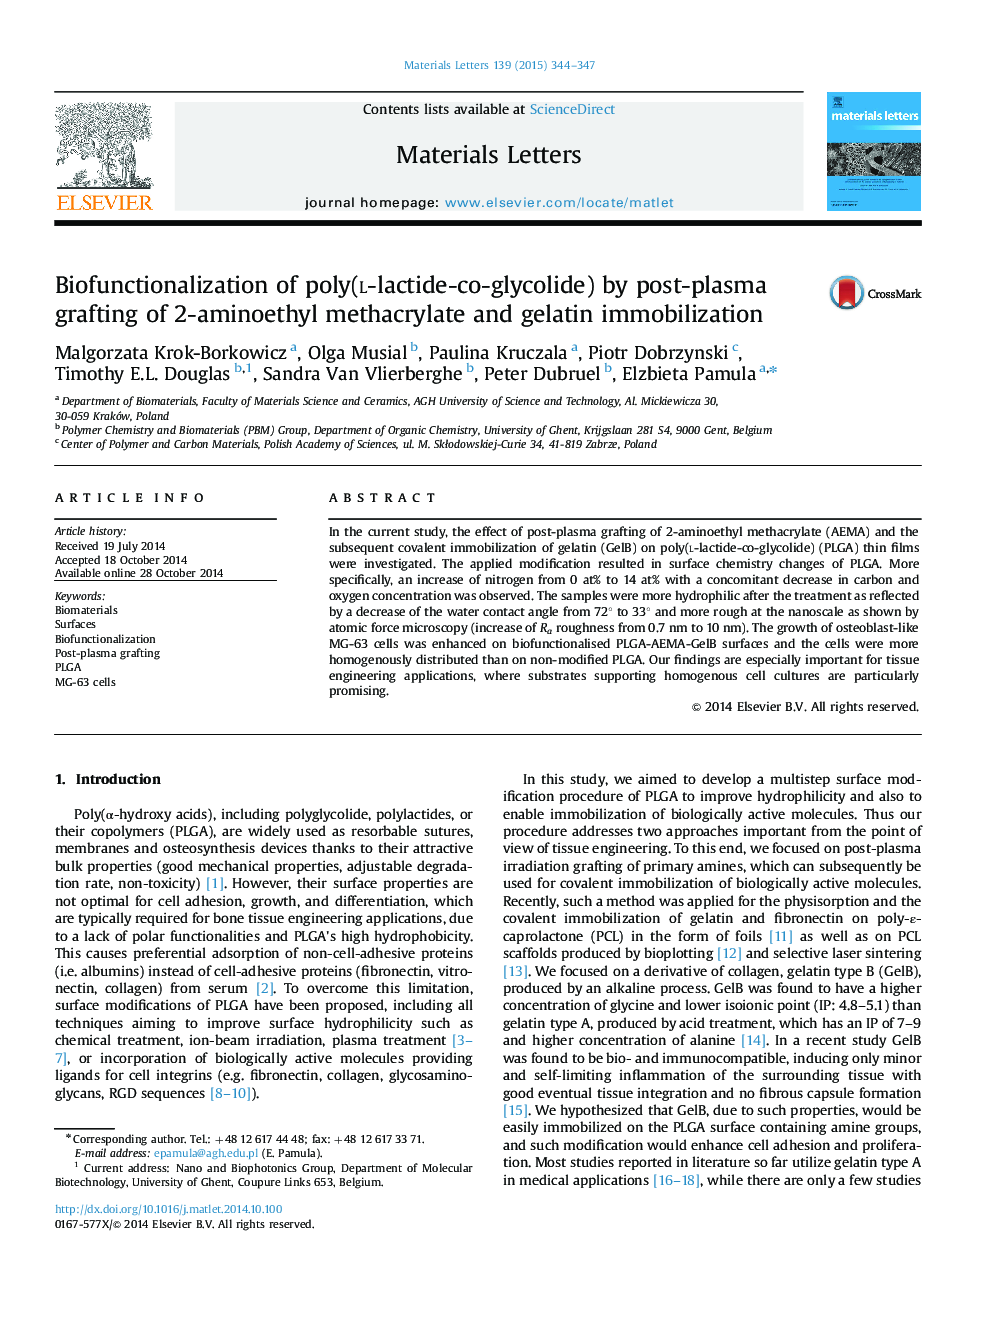 Biofunctionalization of poly(l-lactide-co-glycolide) by post-plasma grafting of 2-aminoethyl methacrylate and gelatin immobilization